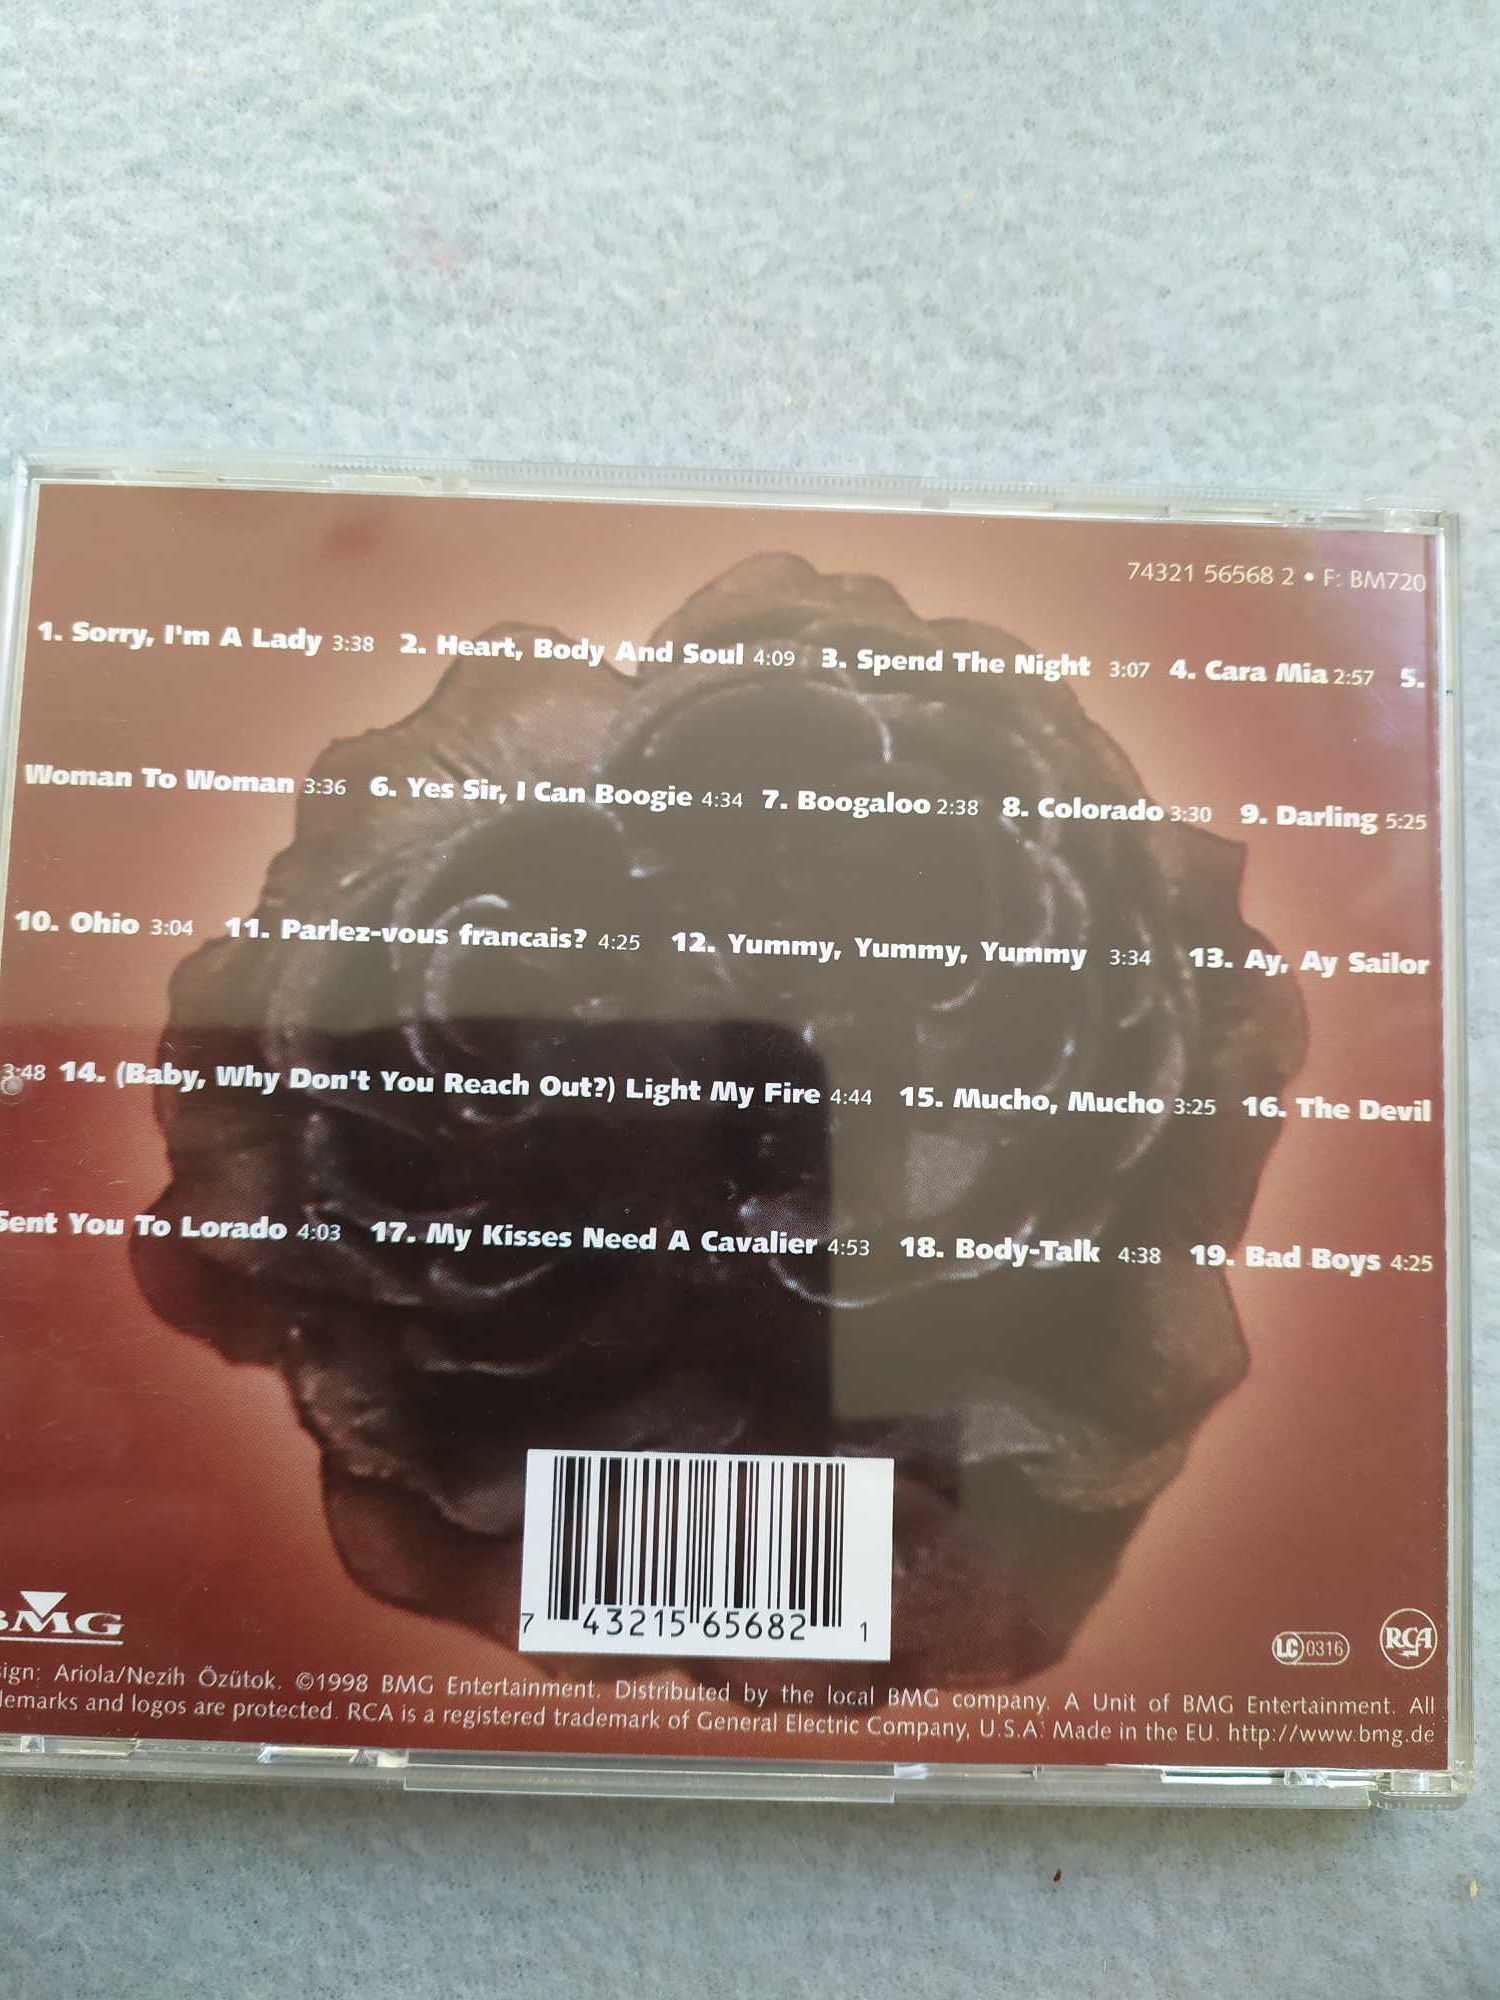 CD Baccara The Collection